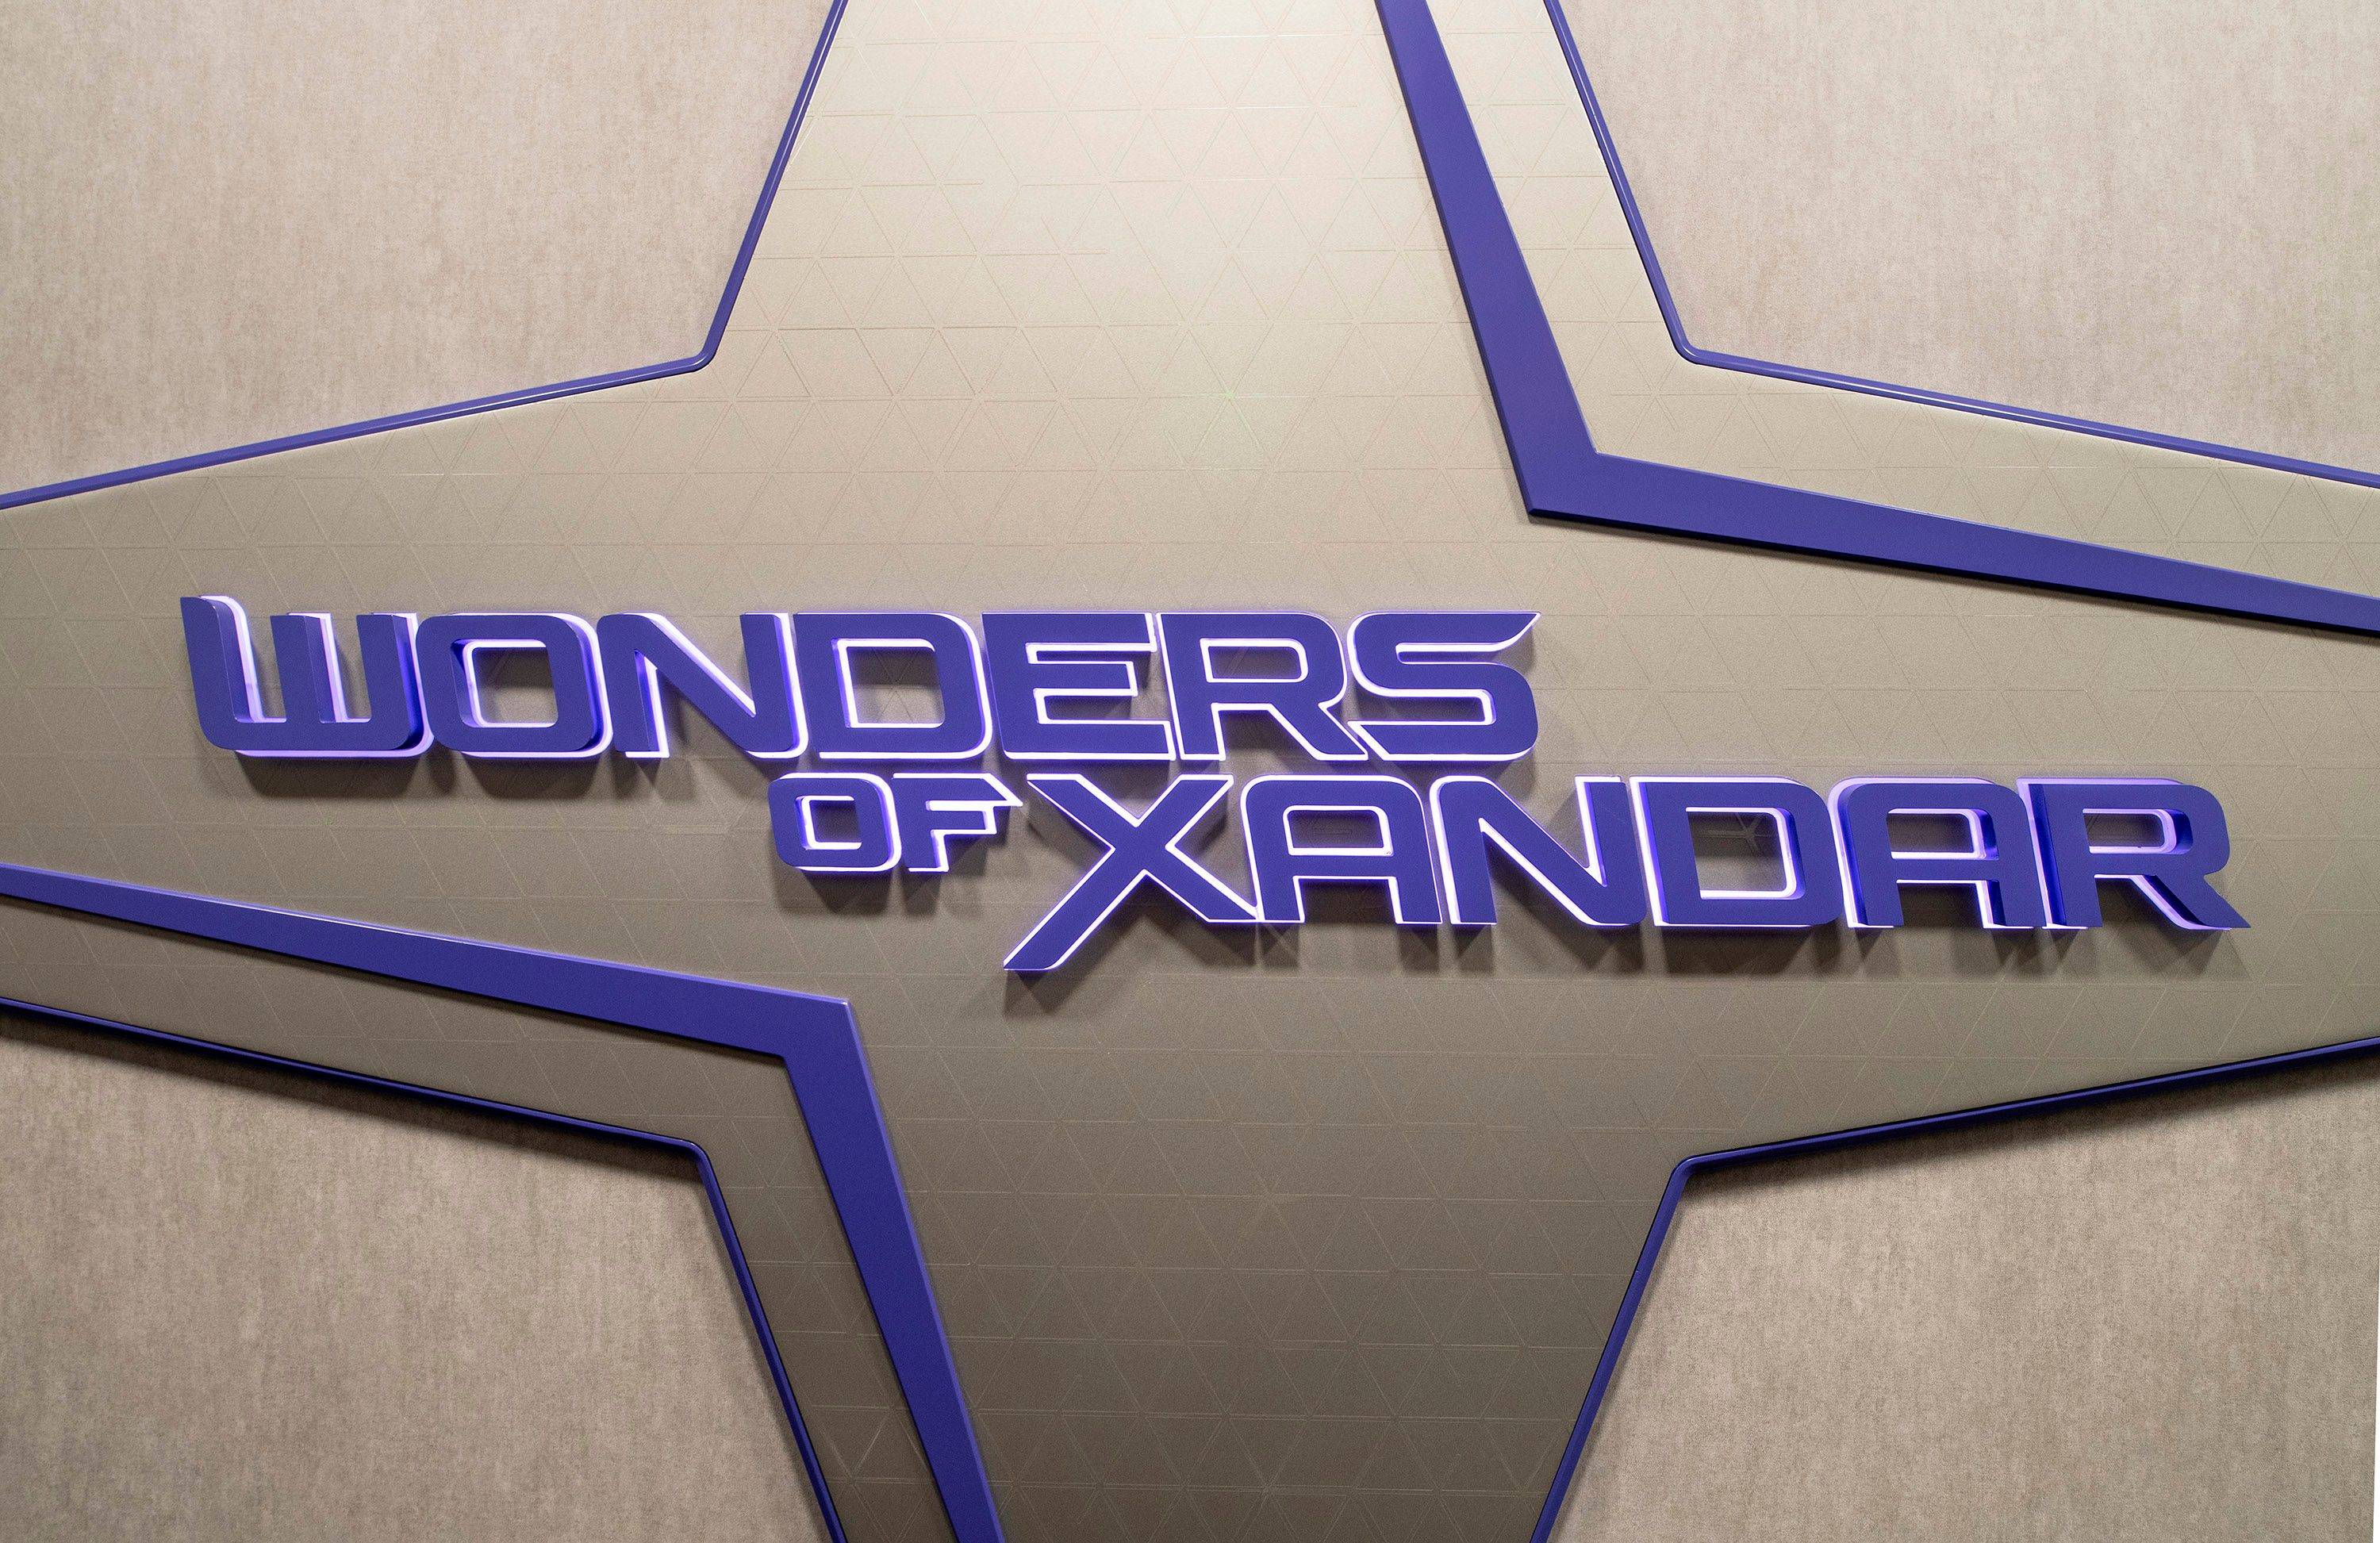 Wonders of Xandar is the first “other-world” pavilion at EPCOT and home to Guardians of the Galaxy: Cosmic Rewind